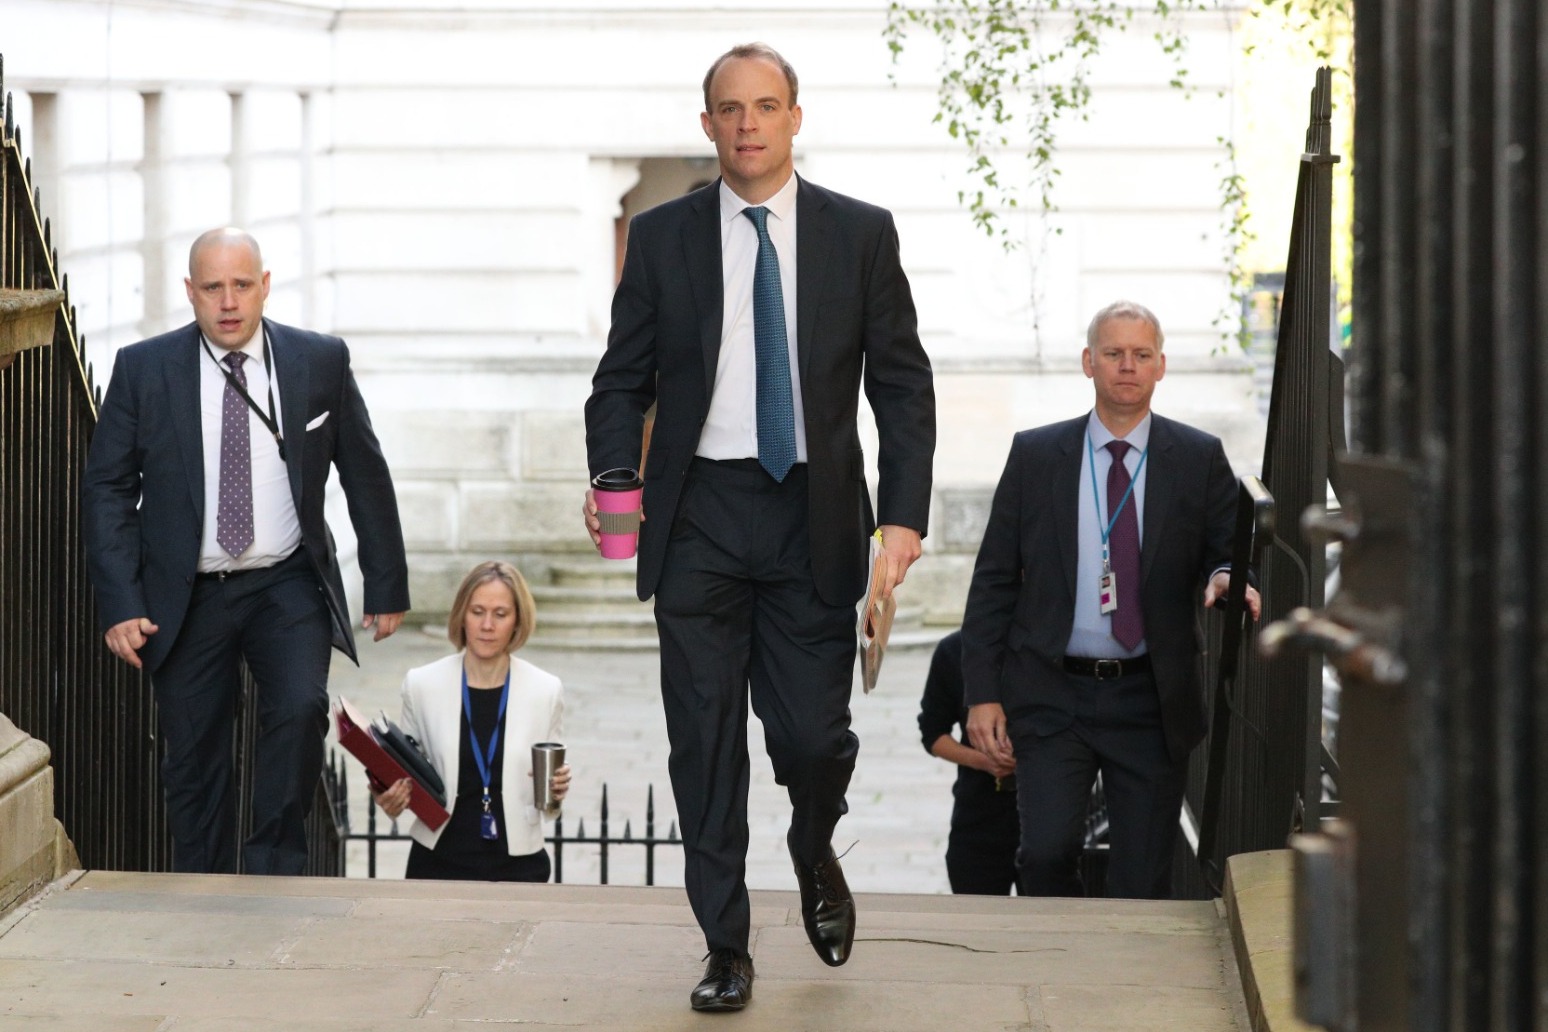 Starmer to quiz Raab on coronavirus response in first PMQs as Labour leader 